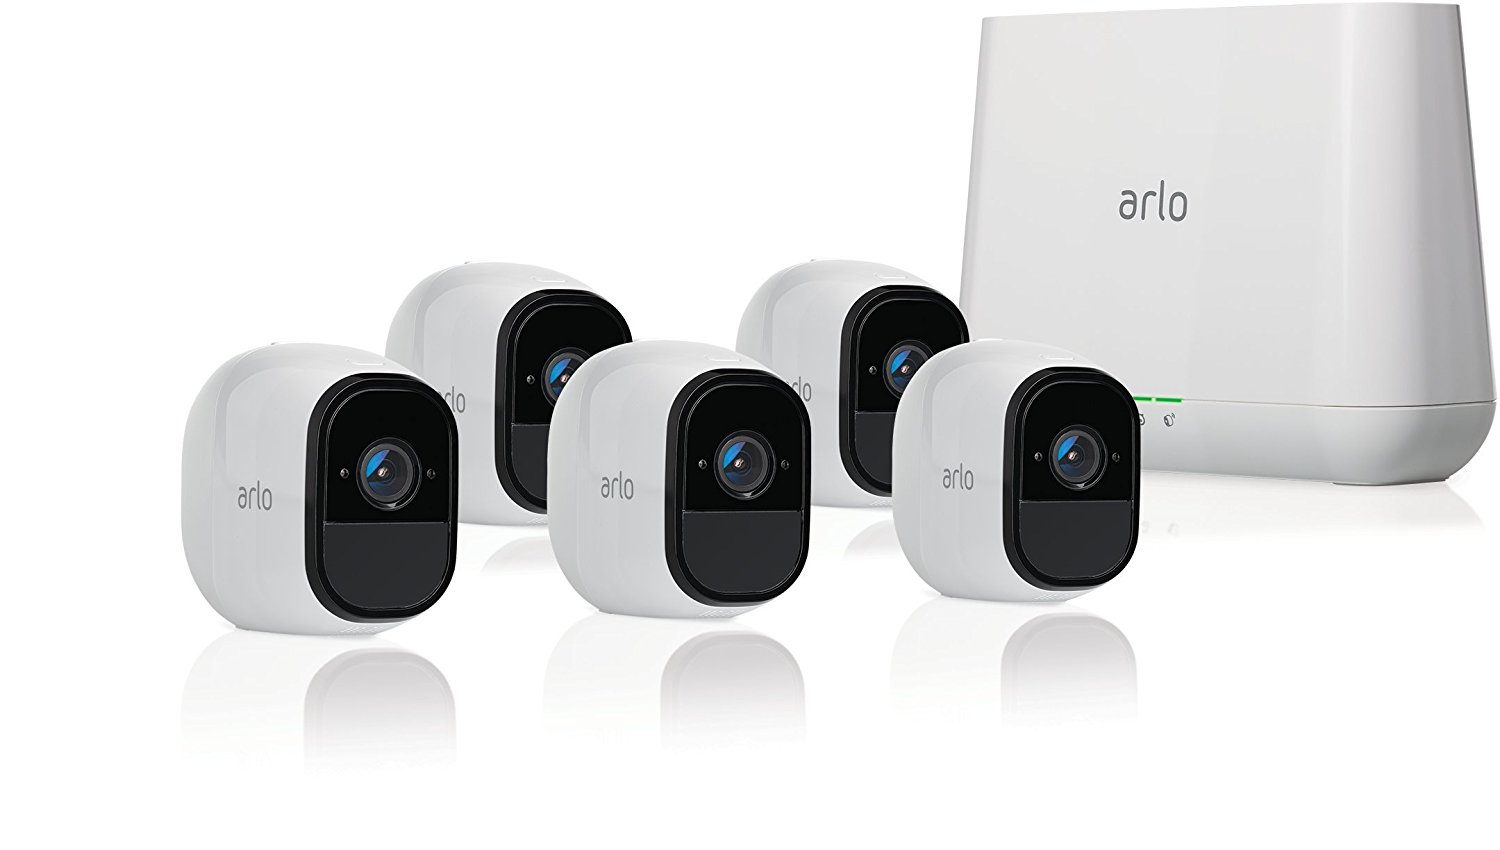 Today only: Arlo security cameras from $100